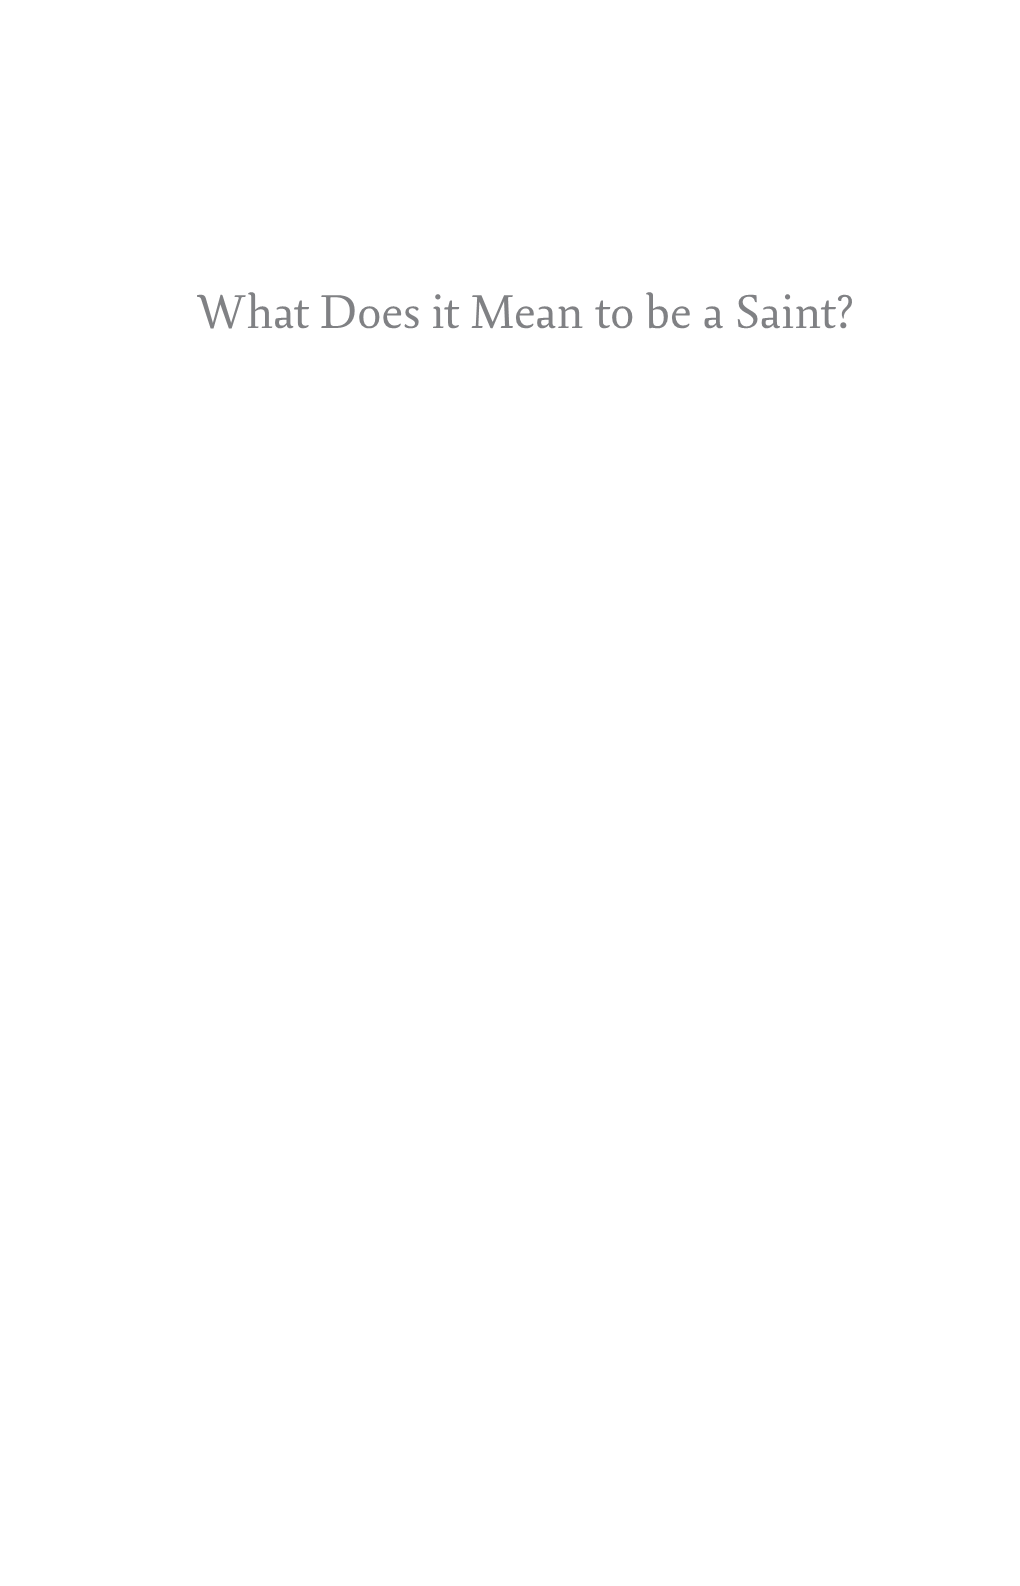 What Does It Mean to Be a Saint?